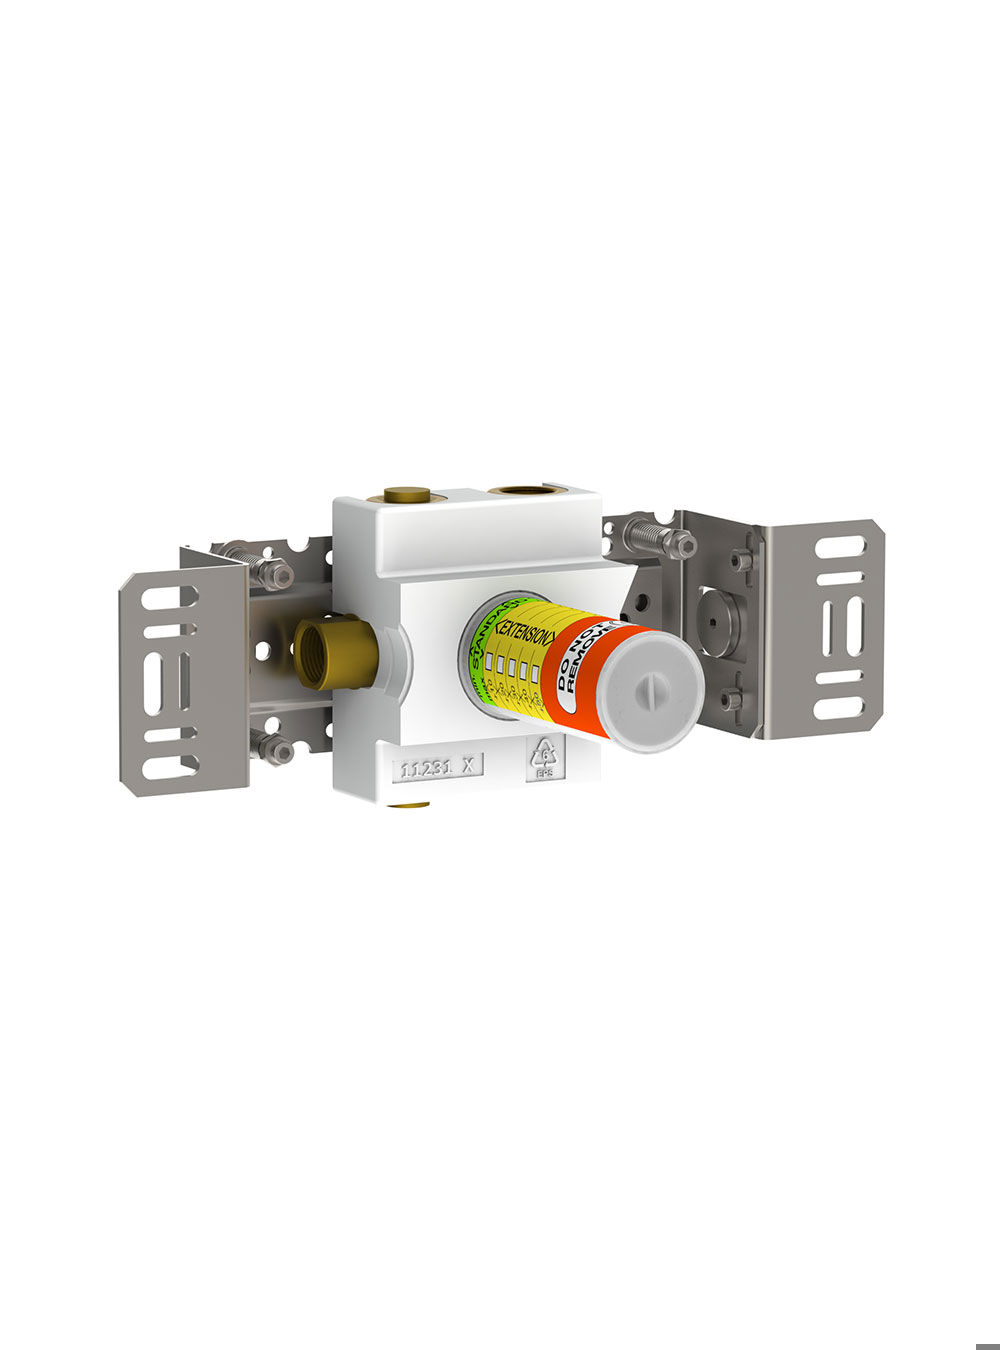 5400DV: Separate diverter. ¾" connection to copper, steel, iron or pex pipe work.